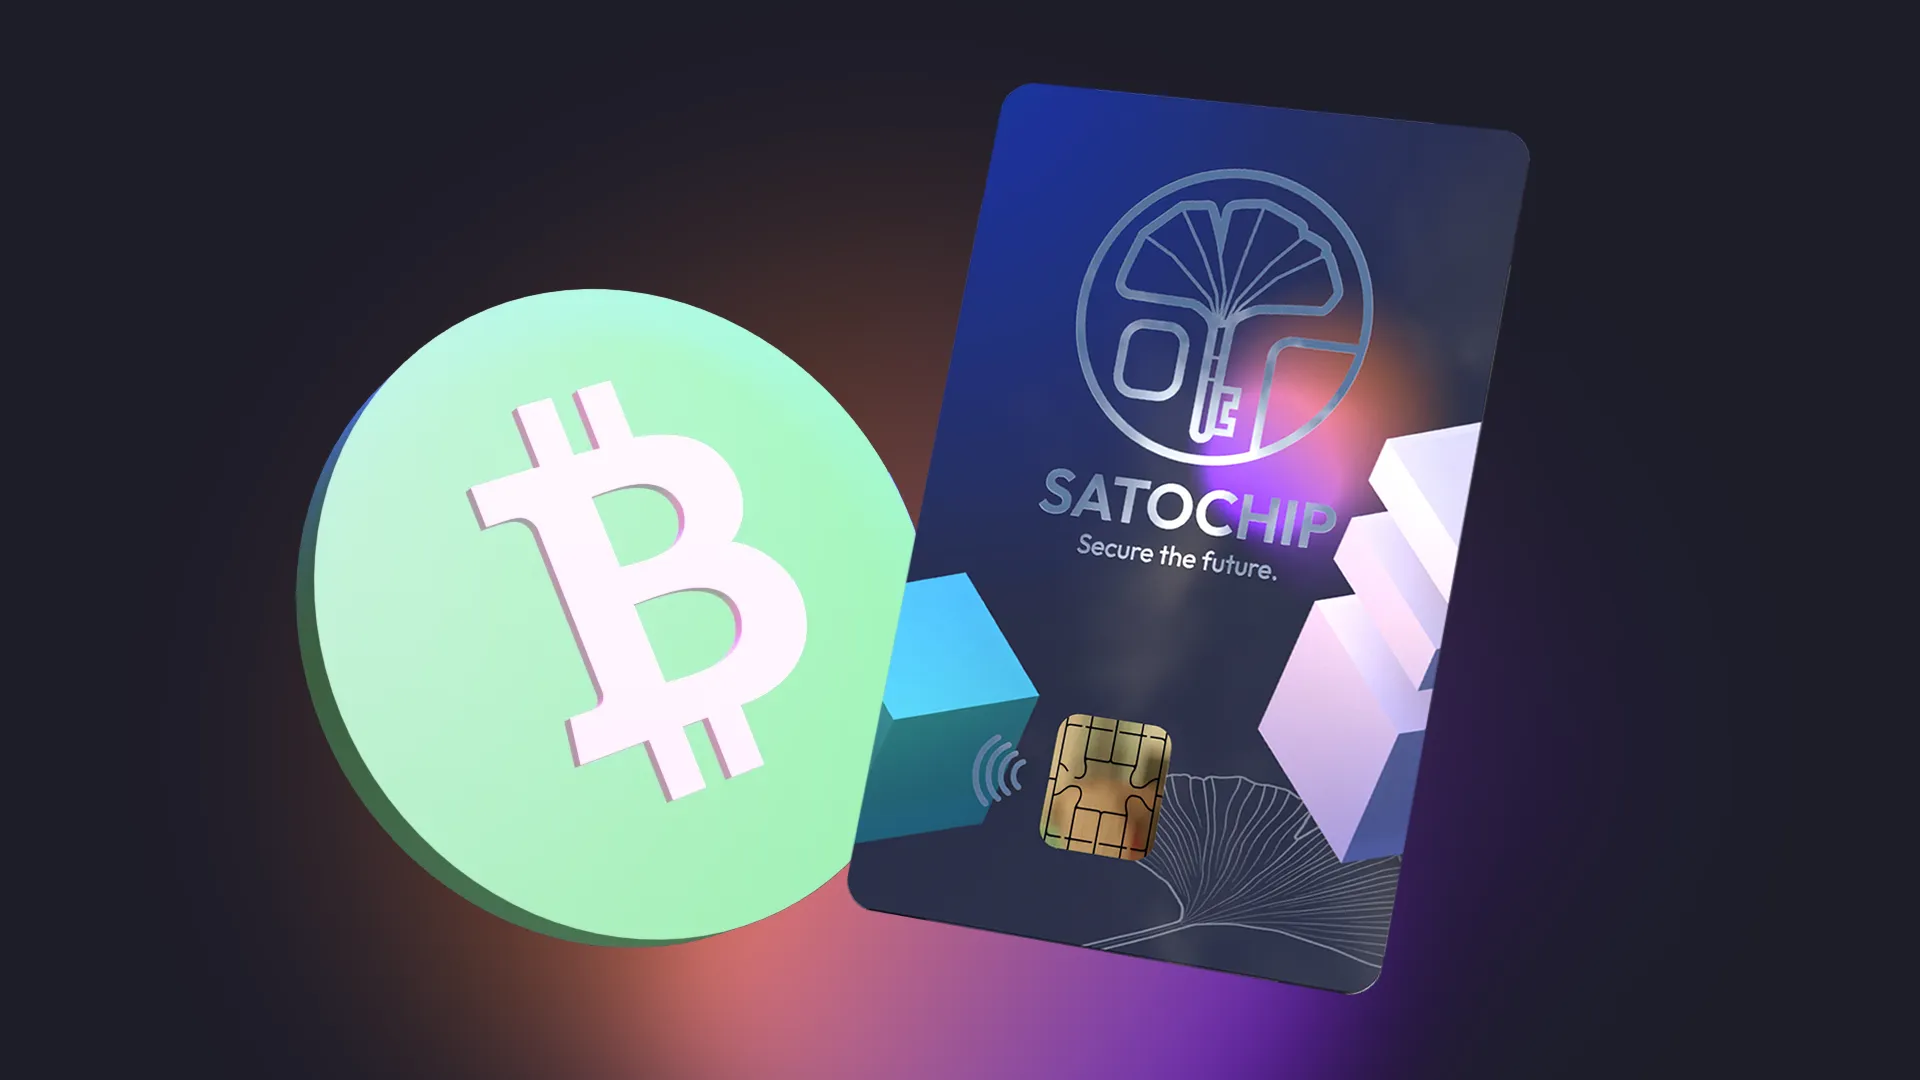 Satochip is natively supported by Electron Cash for Bitcoin Cash.